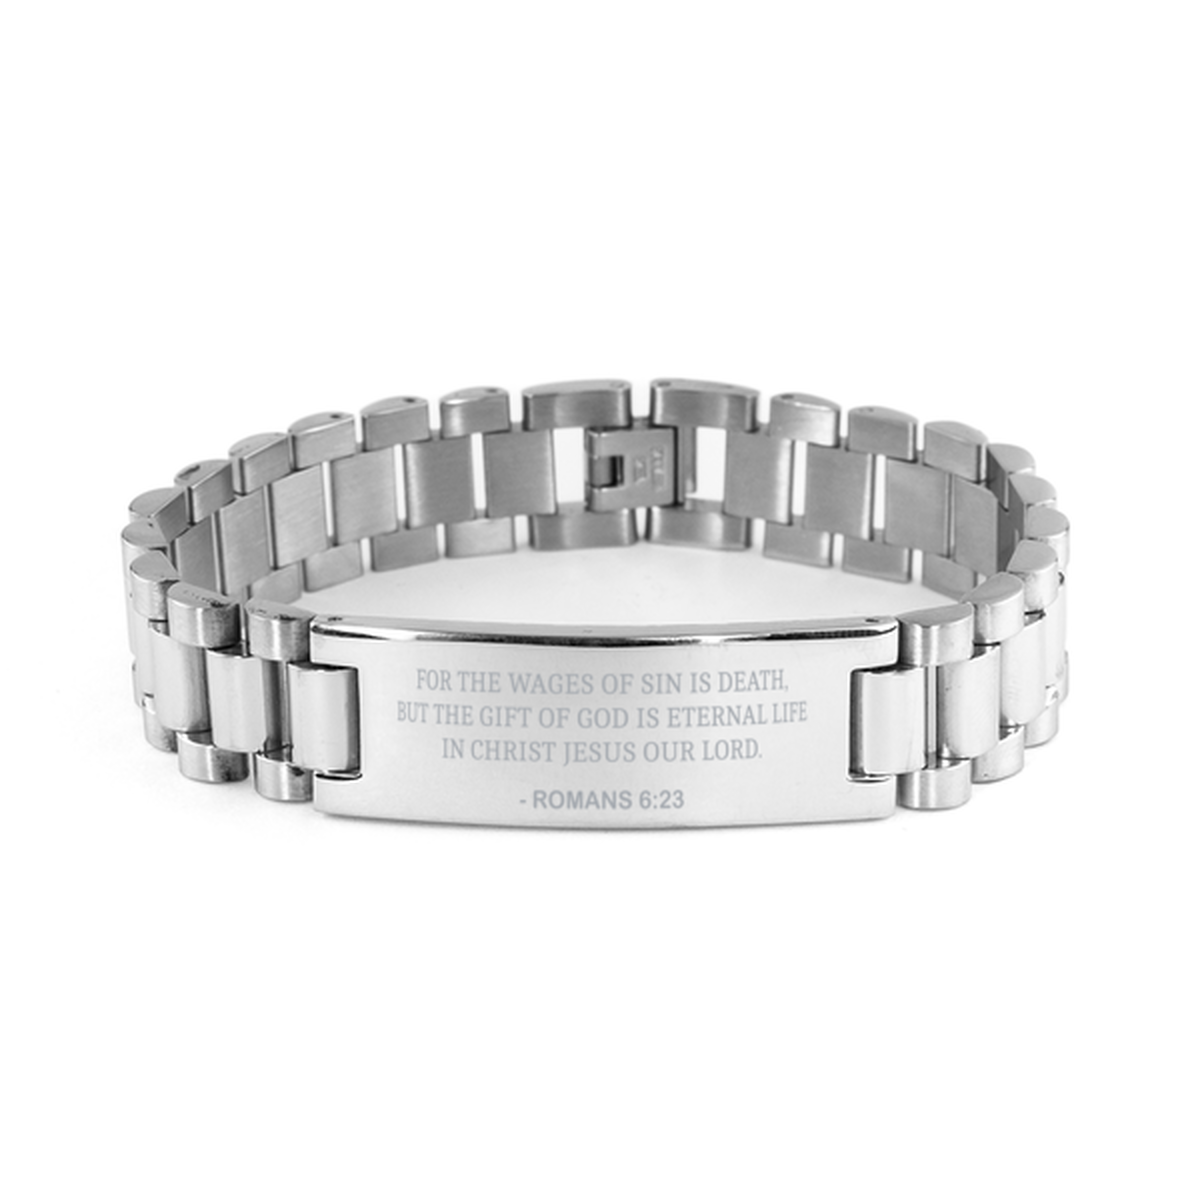 Christian Ladder Stainless Steel Bracelet, Romans 6:23 For The Wages Of Sin Is Death, But The Gift Of, Motivational Bible Verse Gifts For Men Women